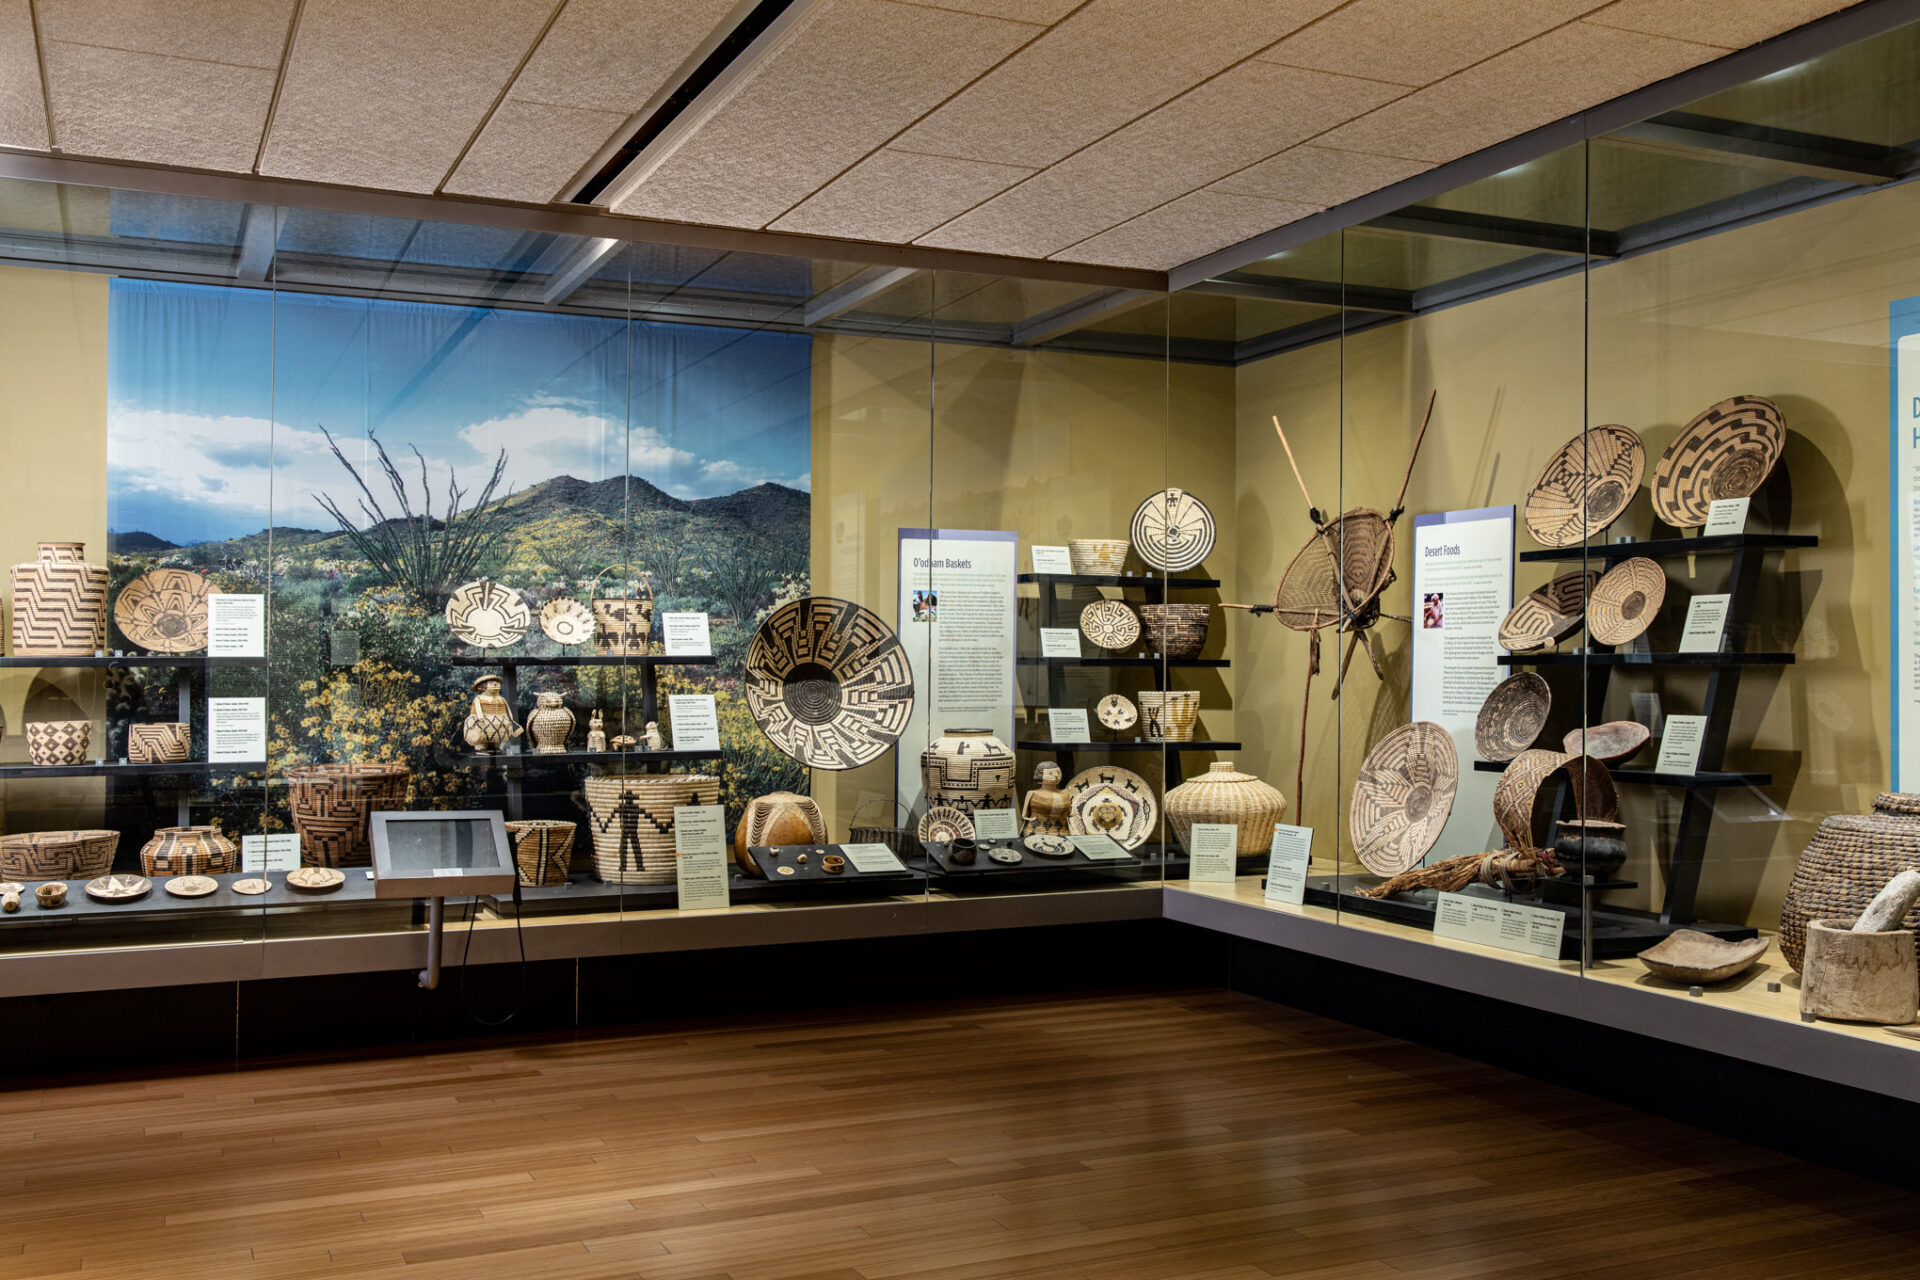 A cased display of baskets and pottery in a gallery.